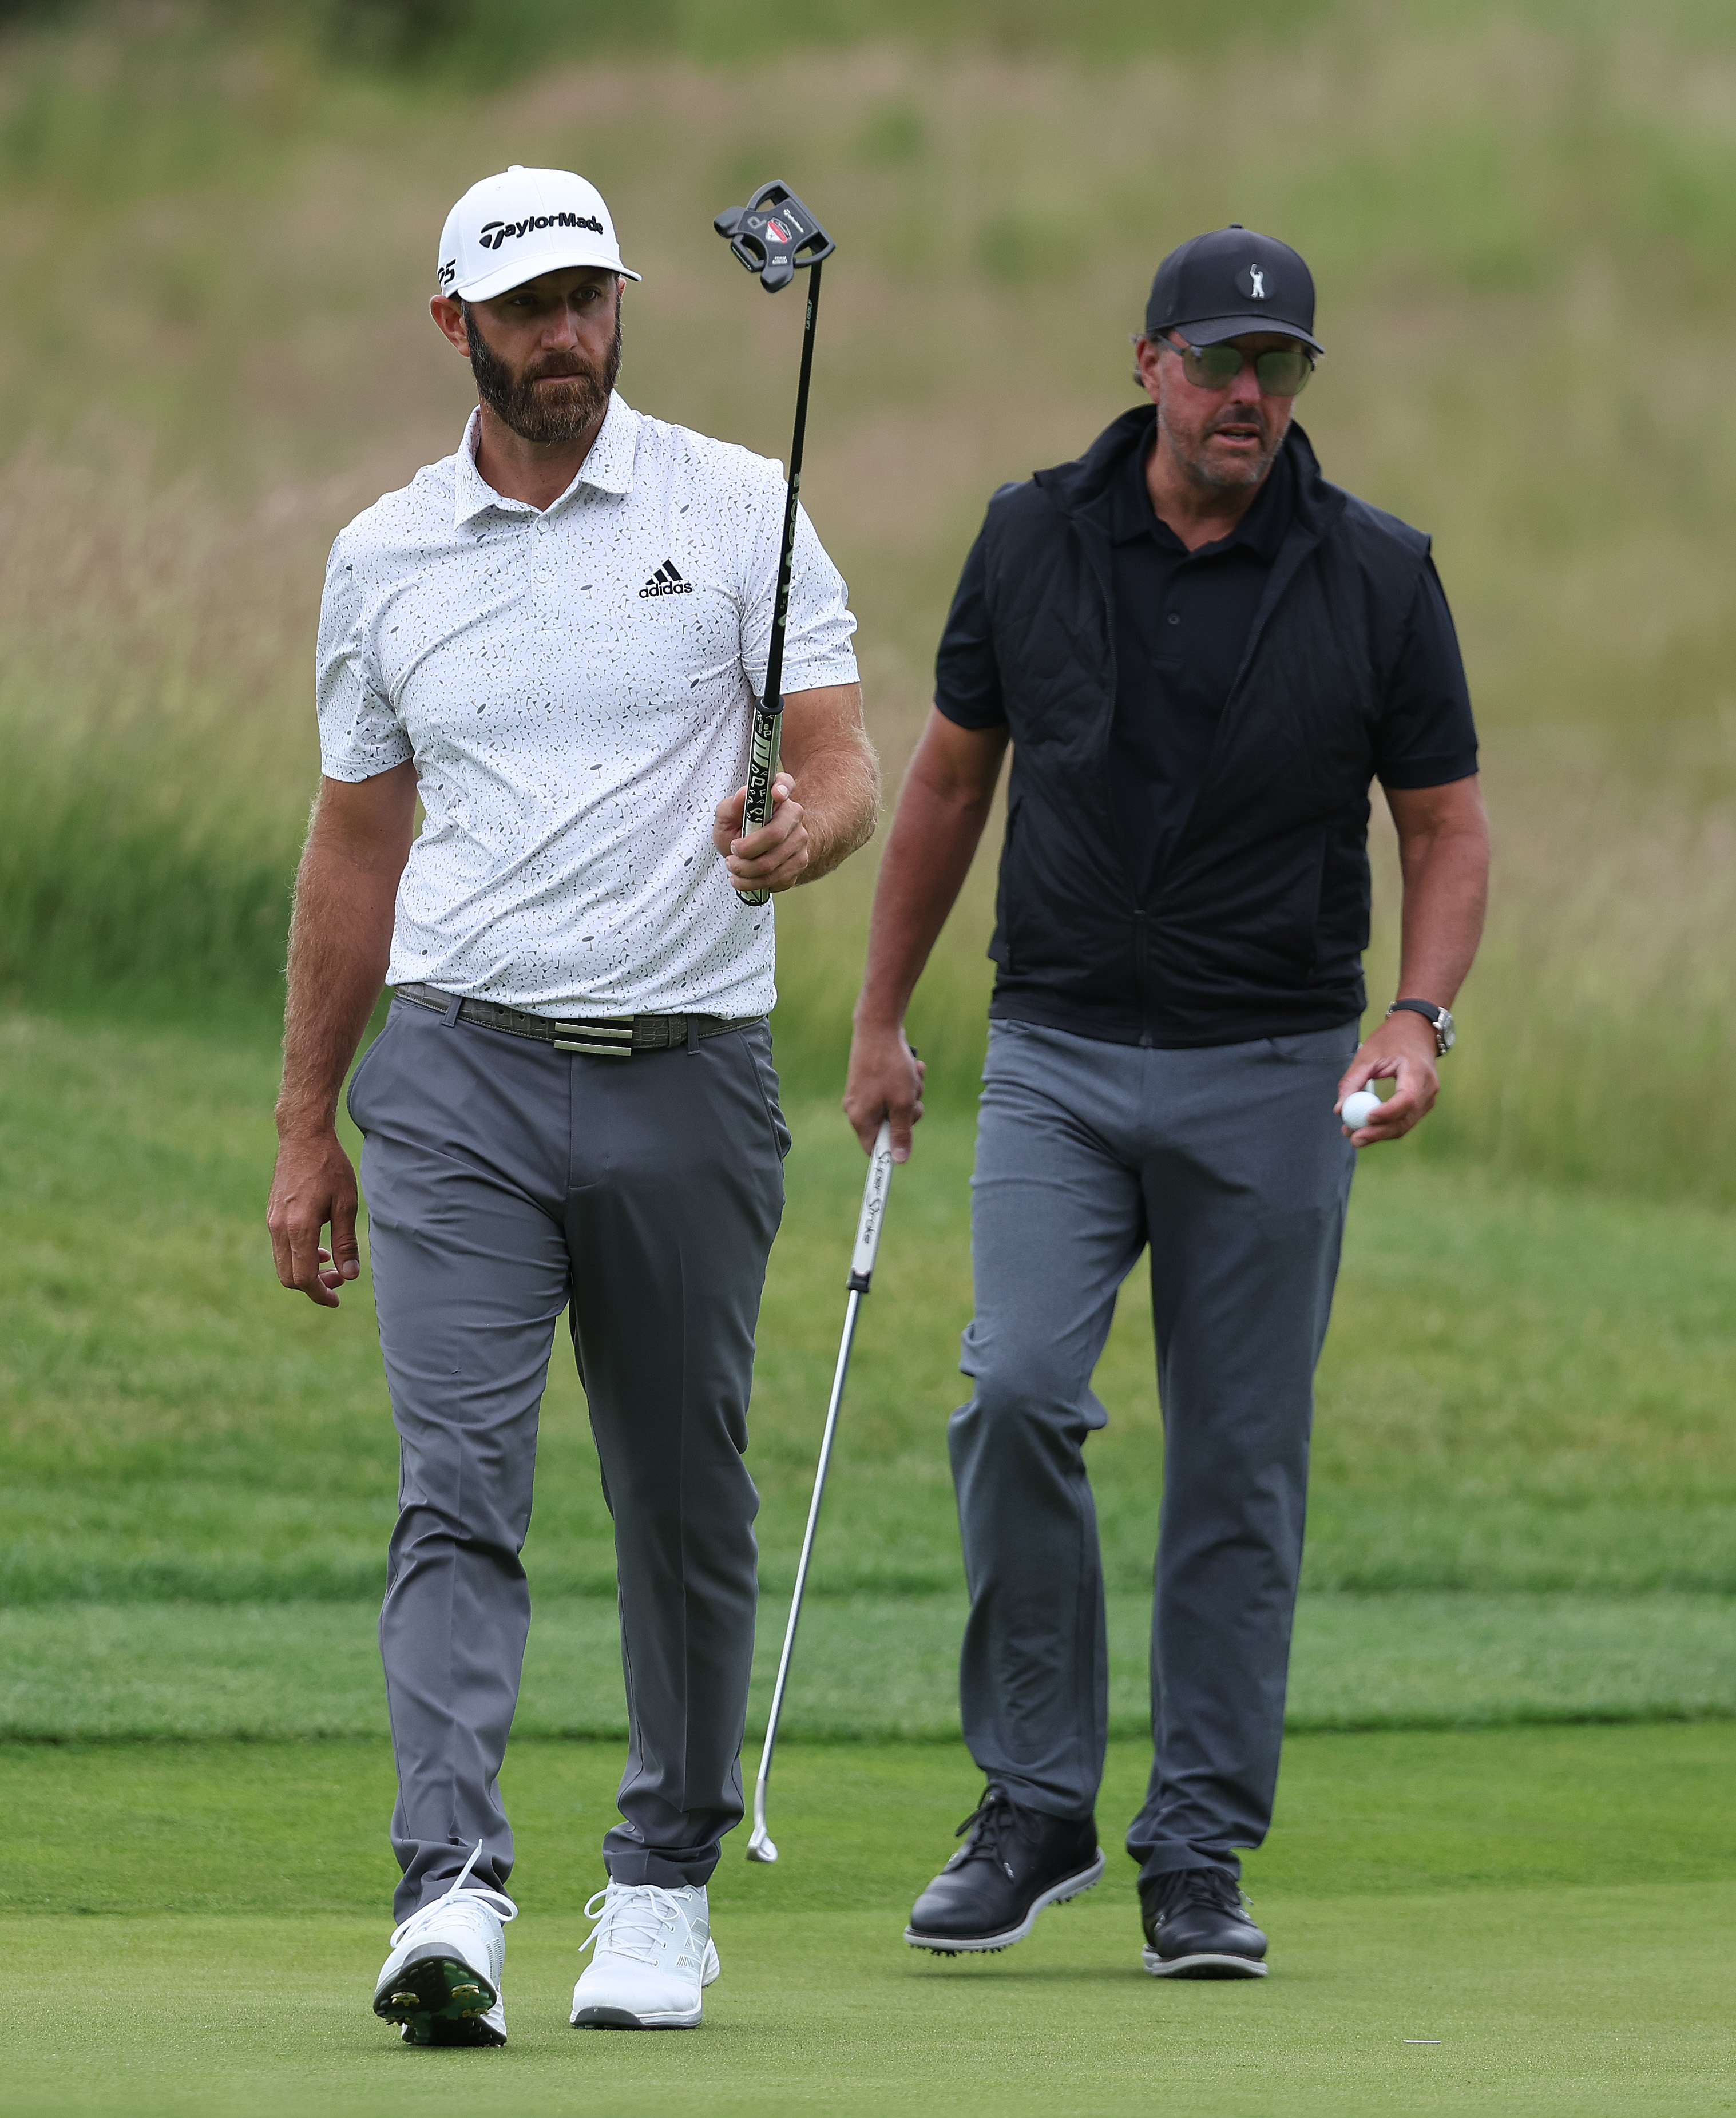 Dustin Johnson and Phil Mickelson of the United States pictured on the 4th green during day one of the LIV Golf Invitational at The Centurion Club on June 09, 2022 in St Albans, England.